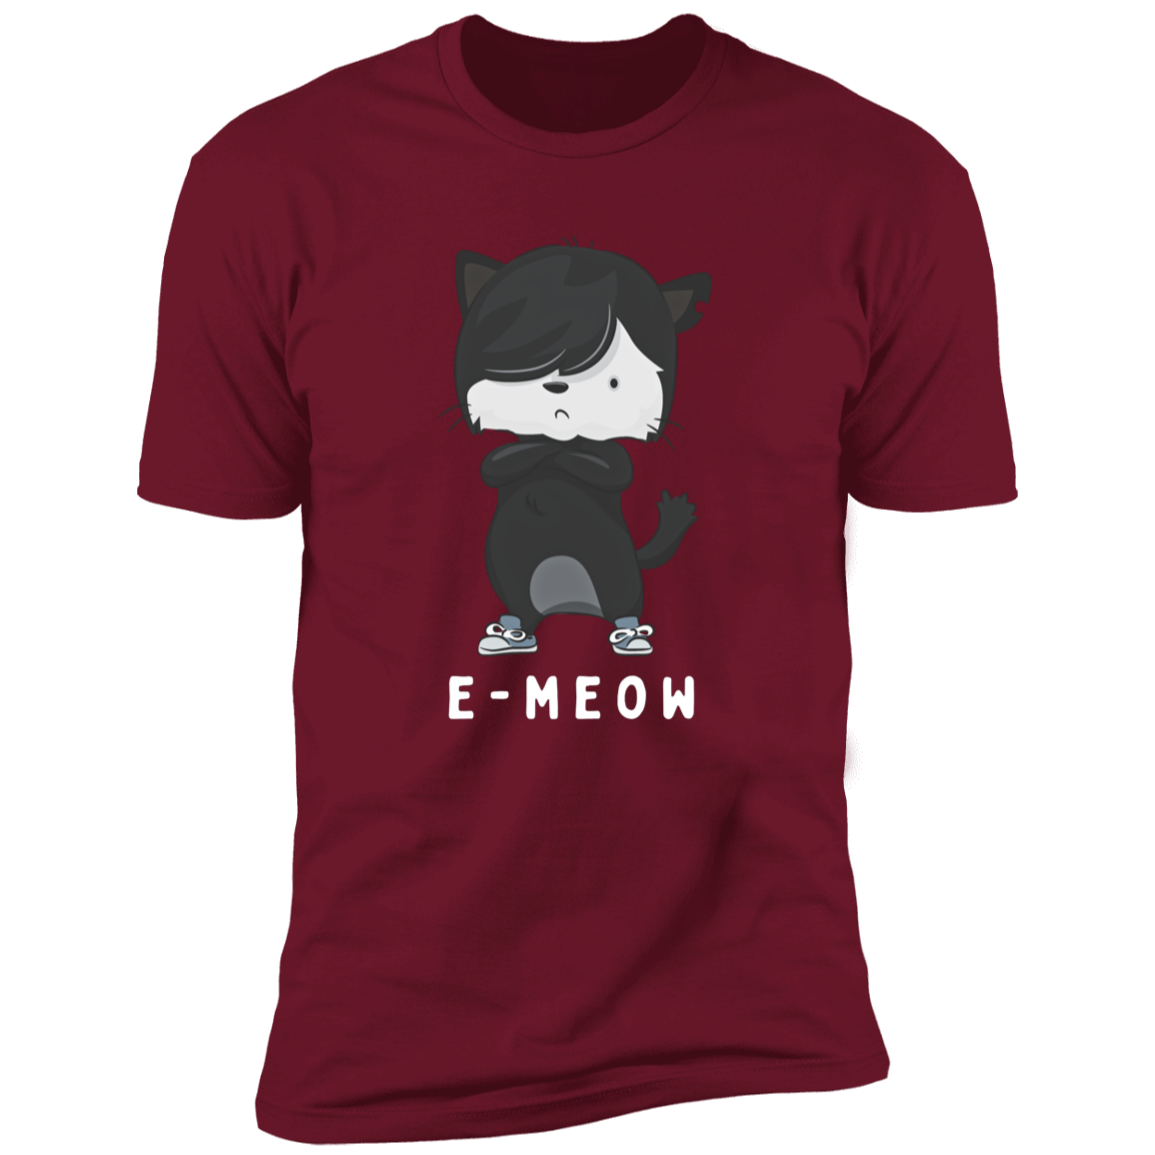 E-meow cat shirt, funny cat shirt for humans, cat mom and cat dad shirt, in cardinal red